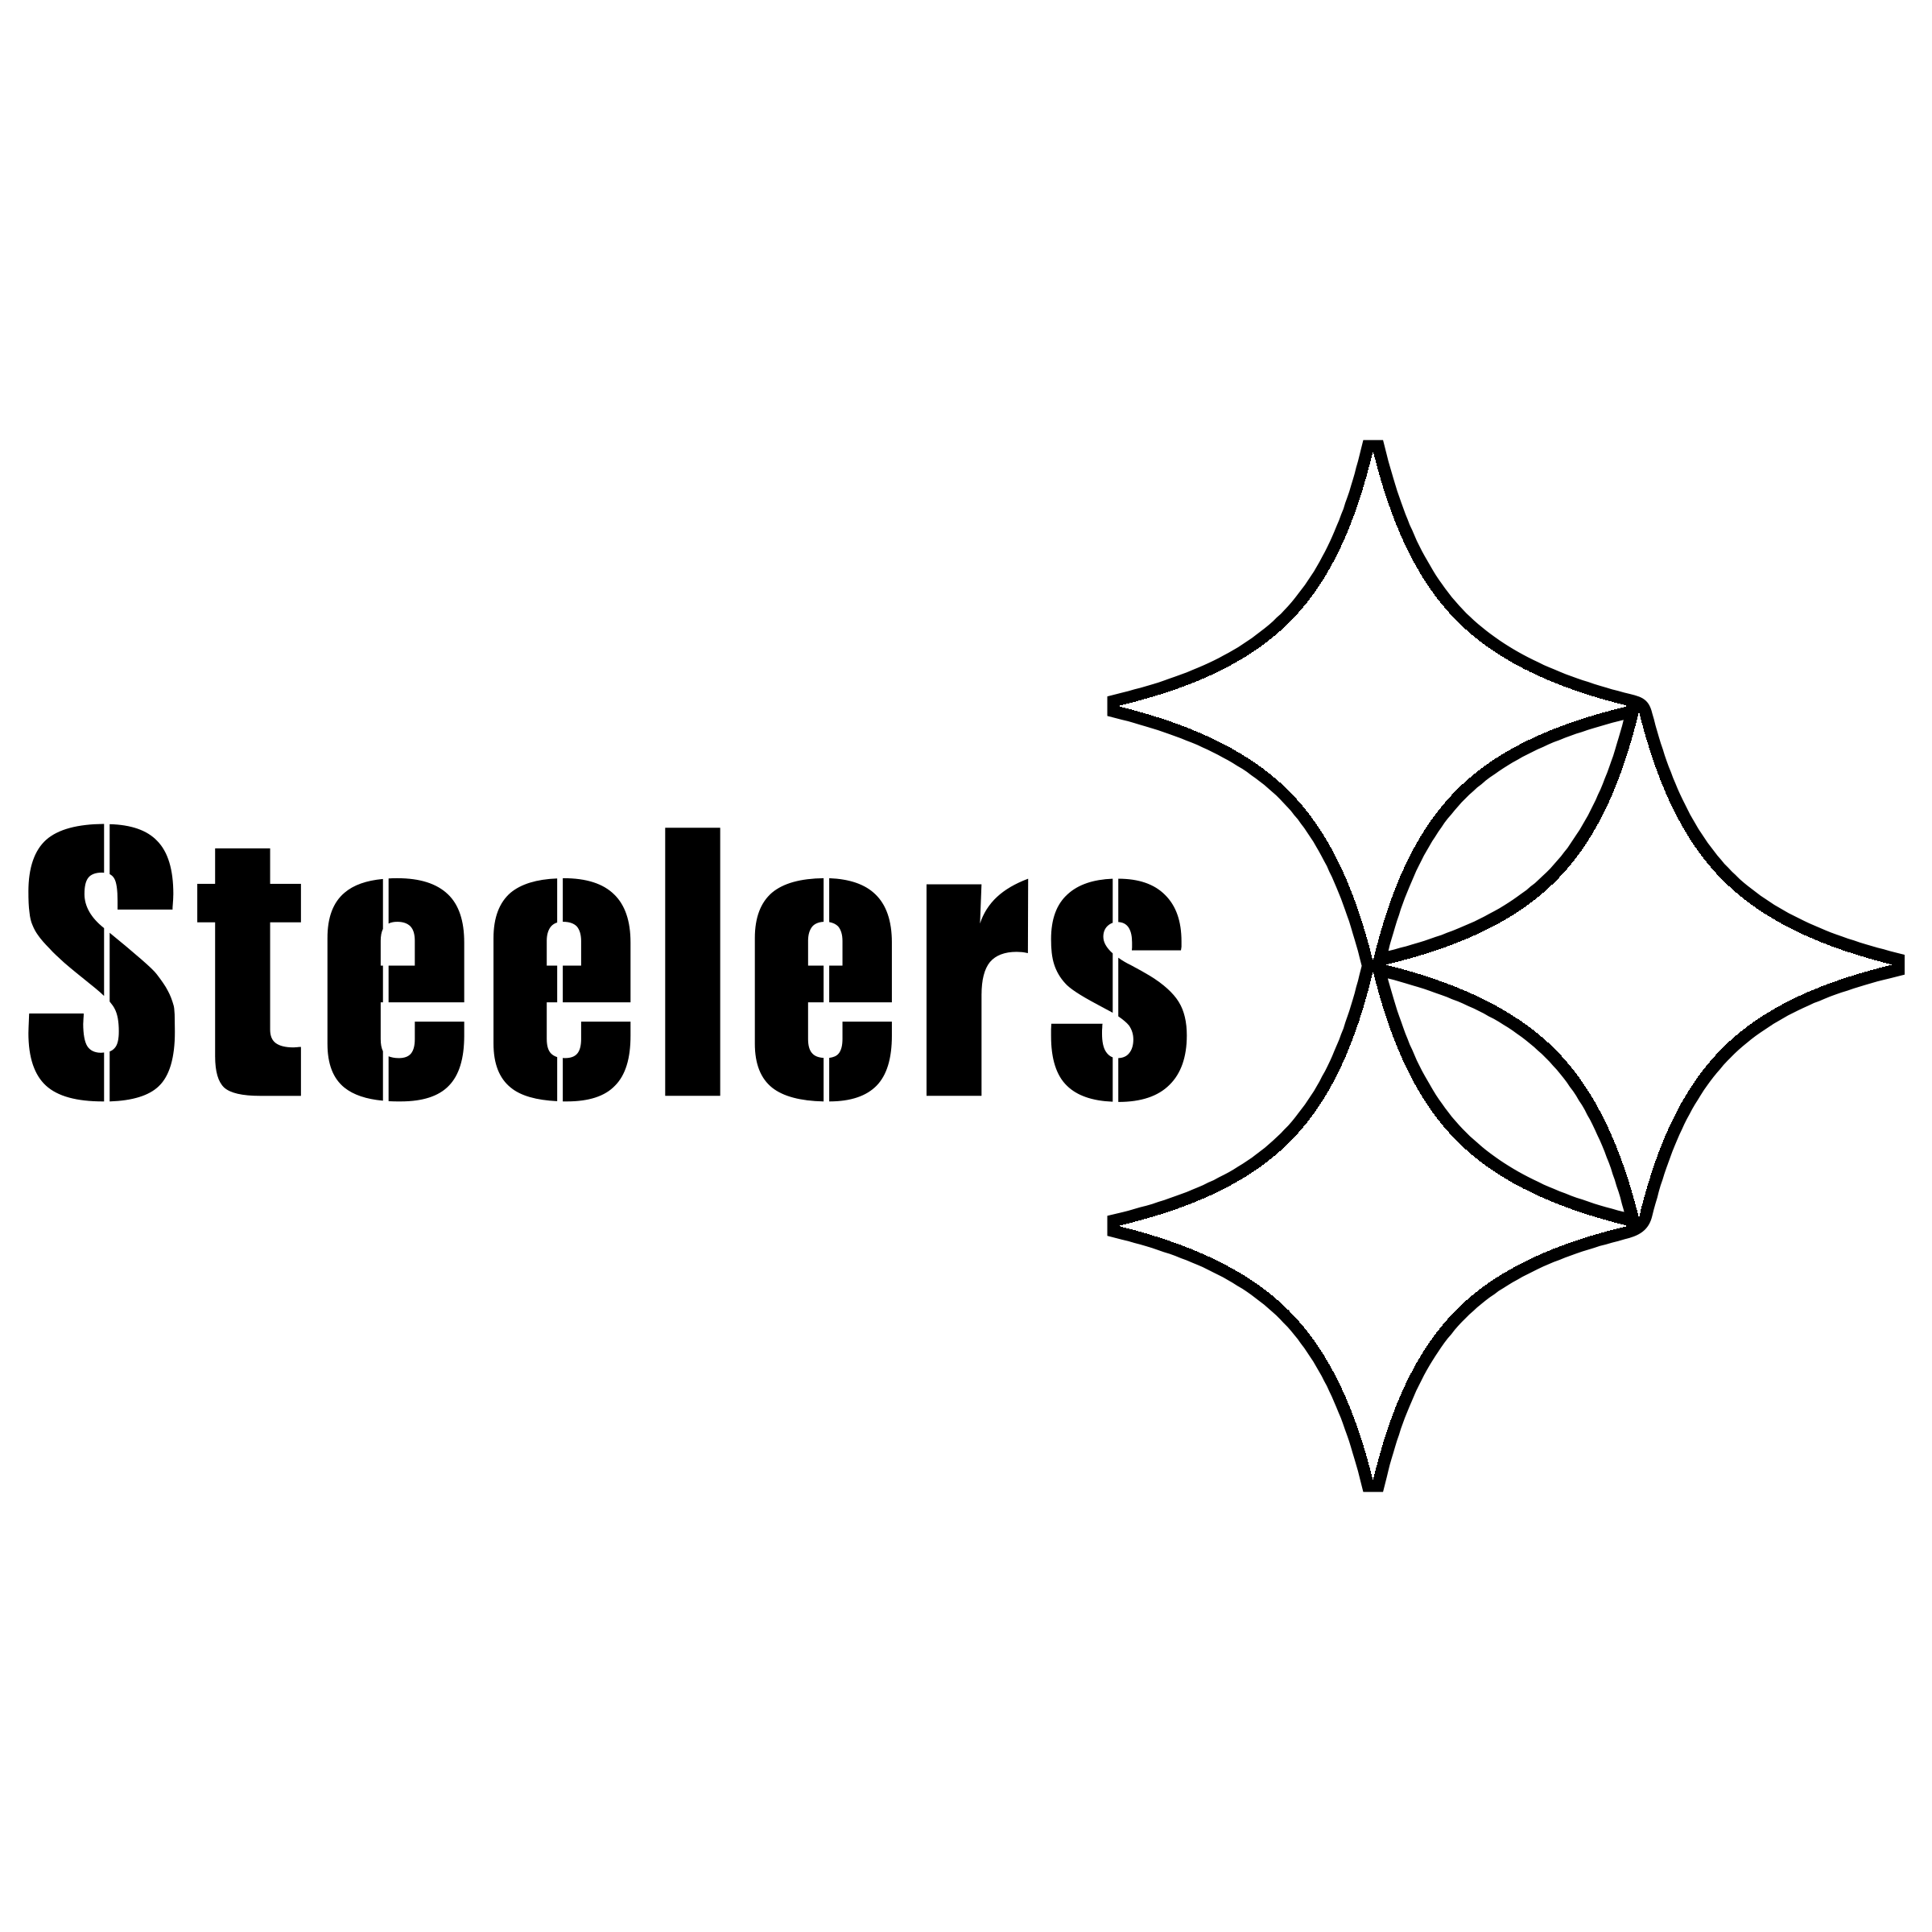 Black and White Steelers Logo - Steelers Logo PNG Transparent & SVG Vector - Freebie Supply